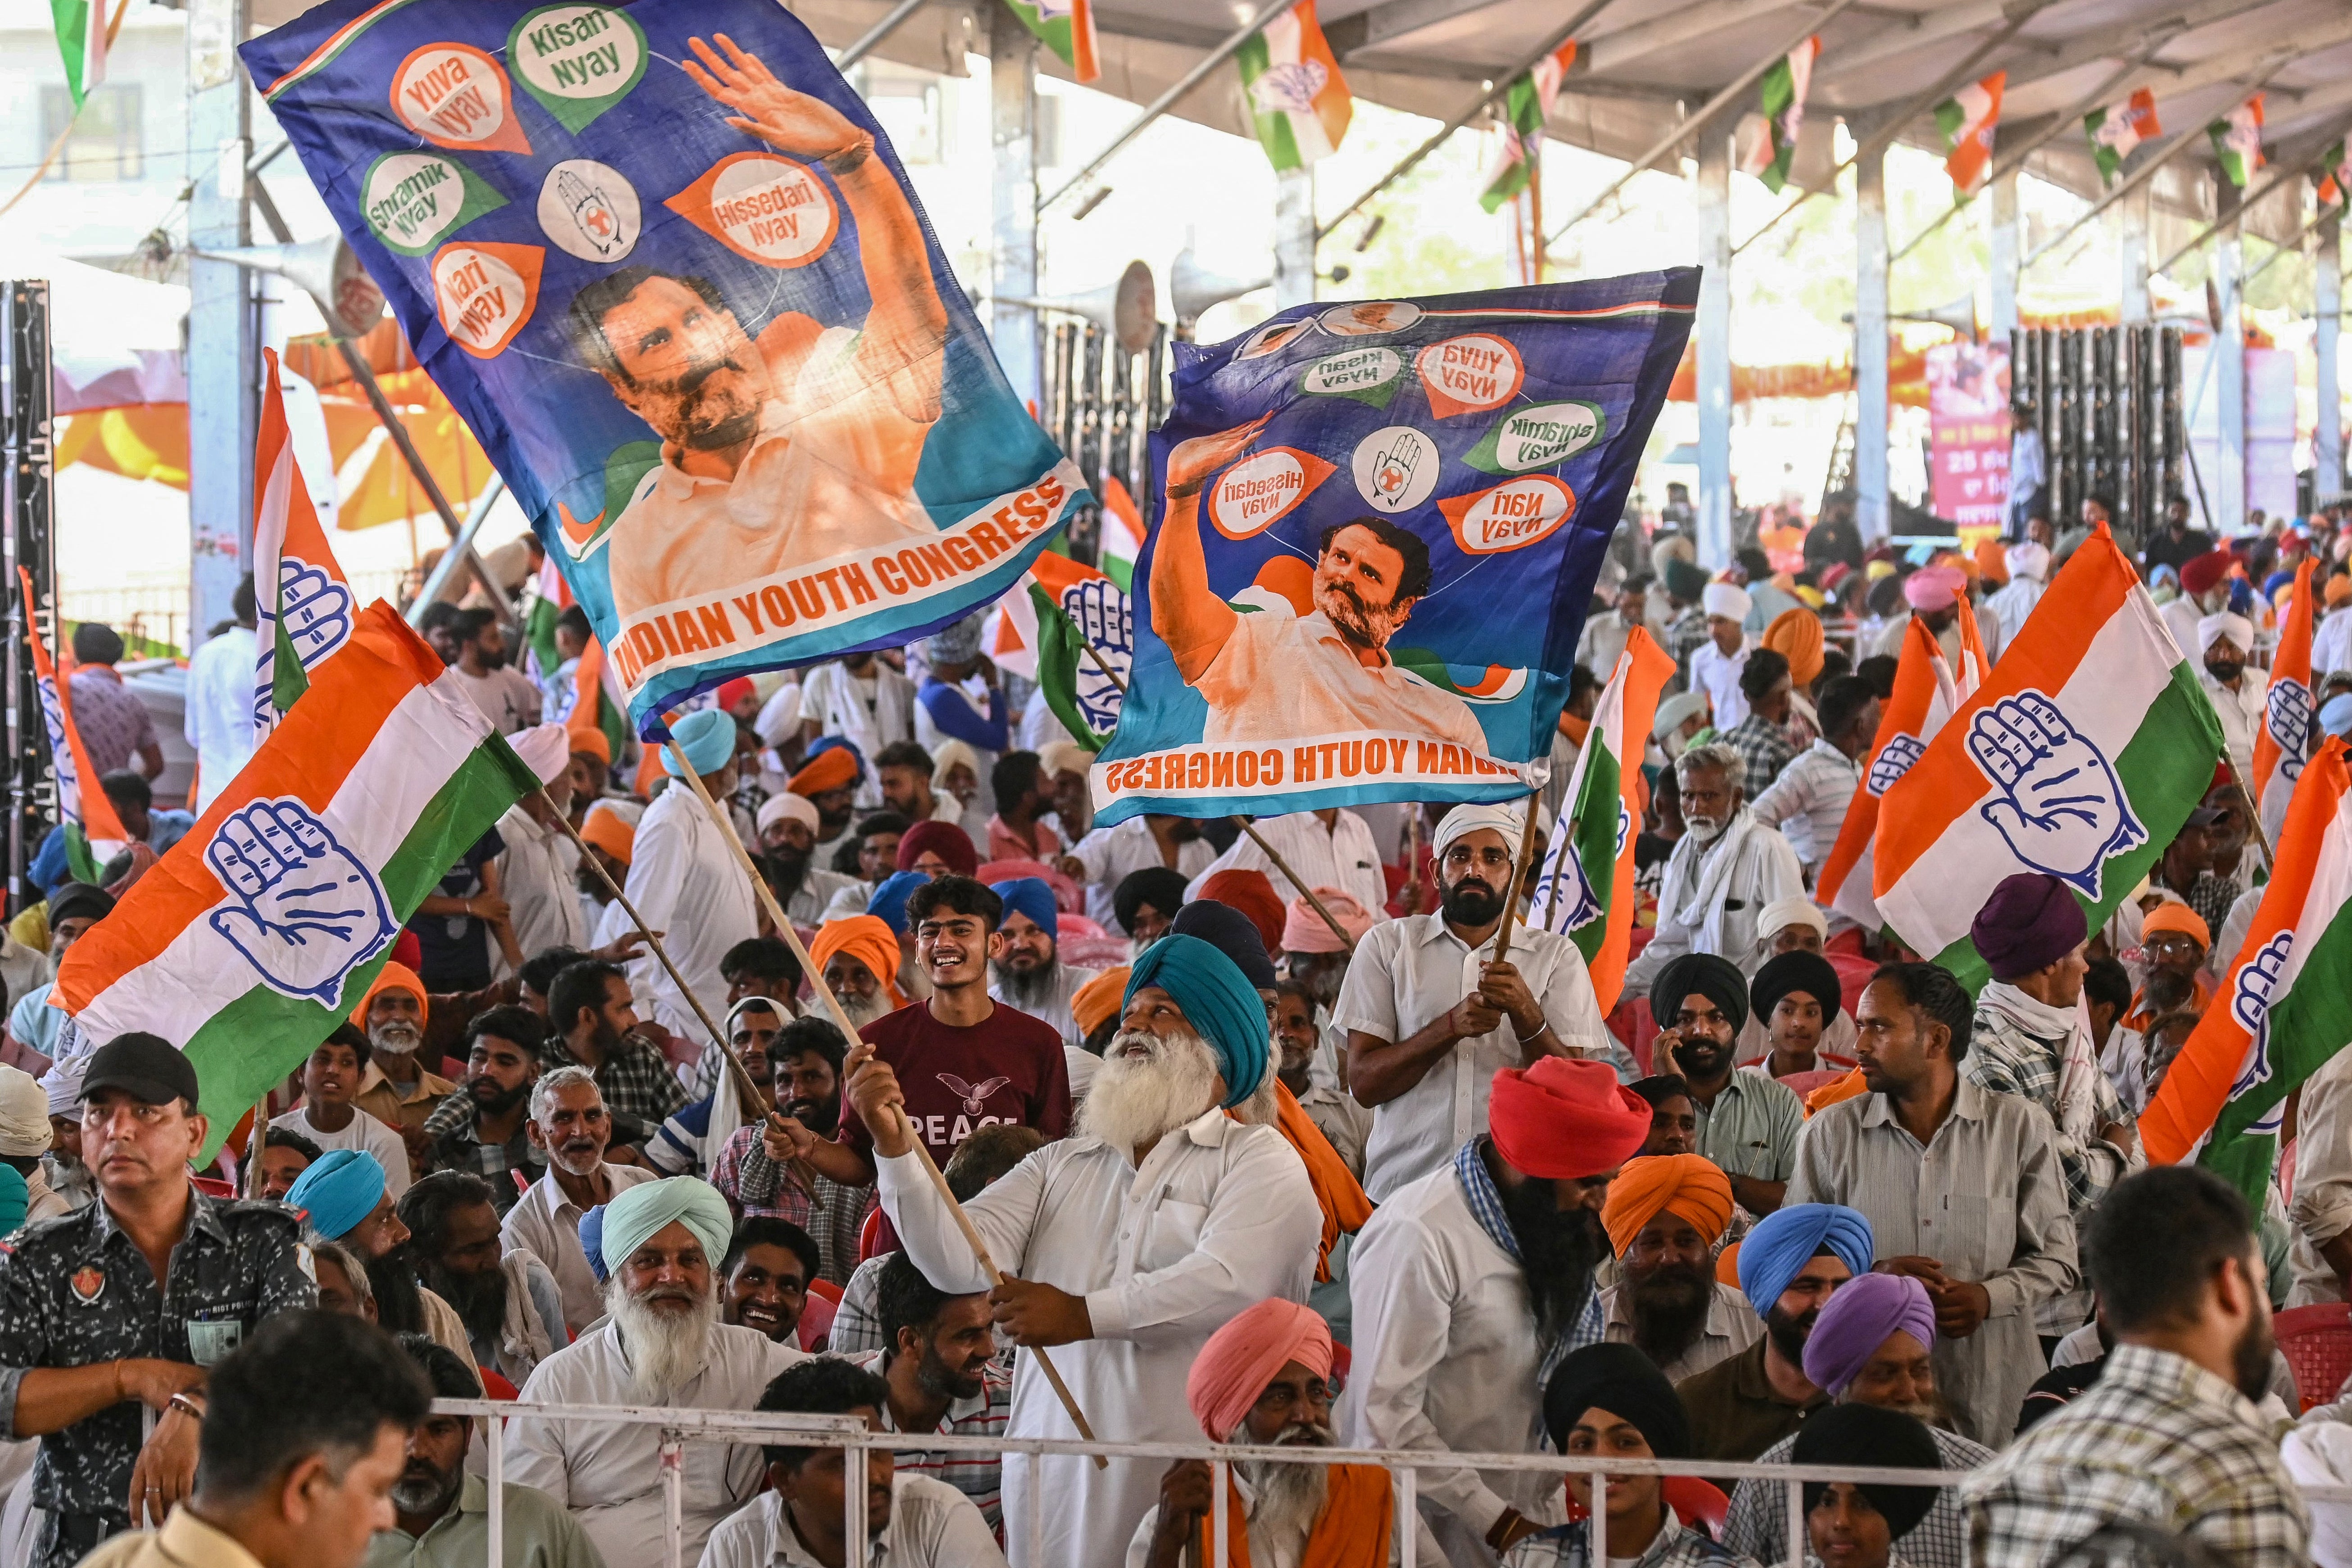 Supporters wave flags with images of Indian National Congress (INC) party leader Rahul Gandhi during an election rally in Amritsar on 25 May